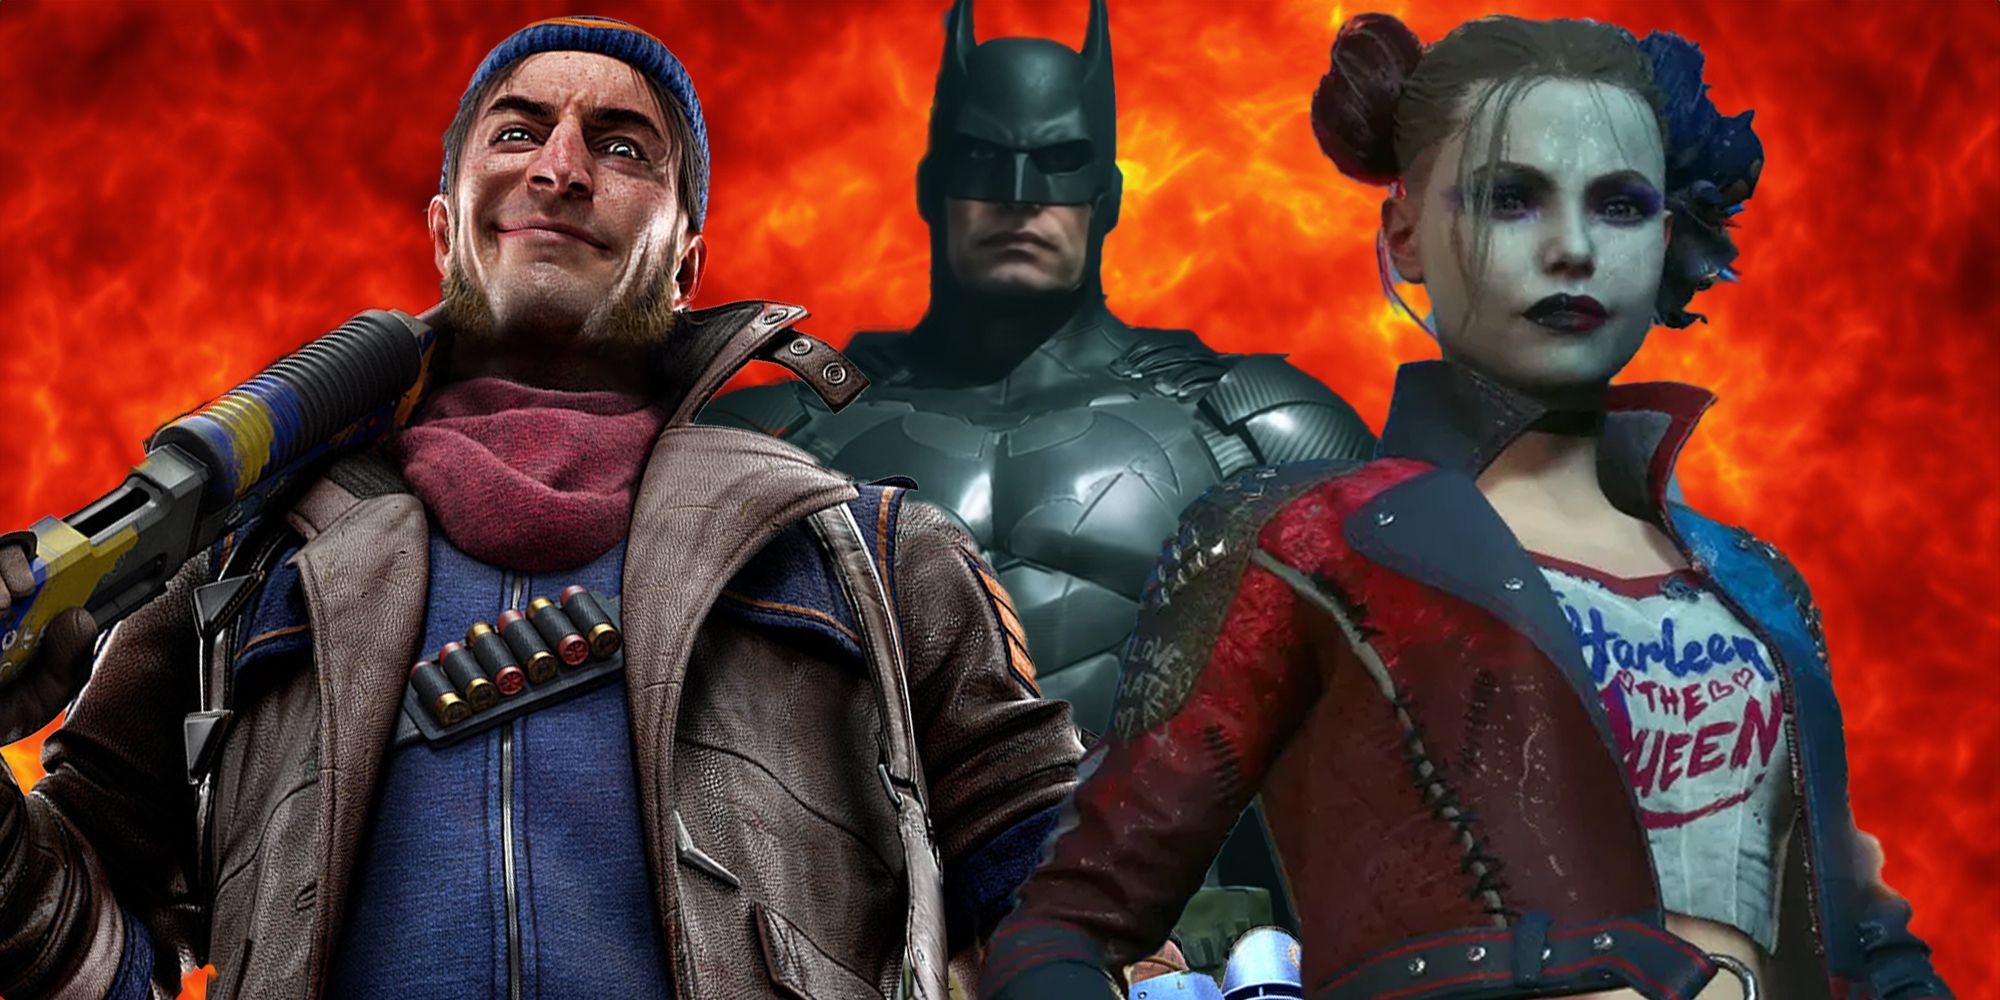 Harley Quinn, Batman, and Captain Boomerang from Suicide Squad: Kill the Justice League.